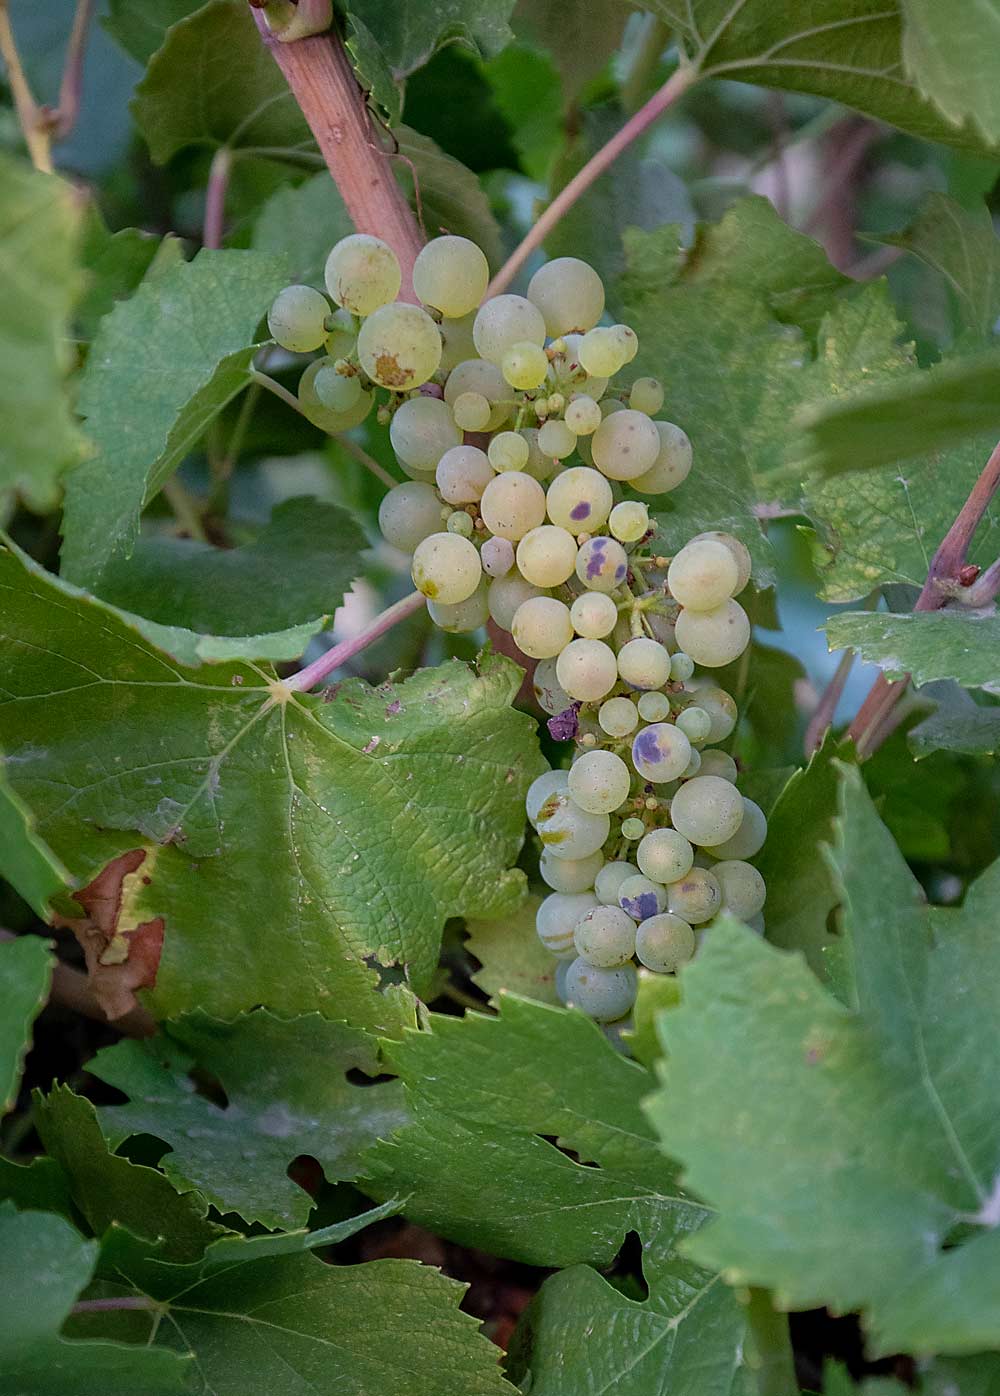 Sunburn damage on Chardonnay grapes in August at a Washington State University research vineyard in Prosser. (TJ Mullinax/Good Fruit Grower)